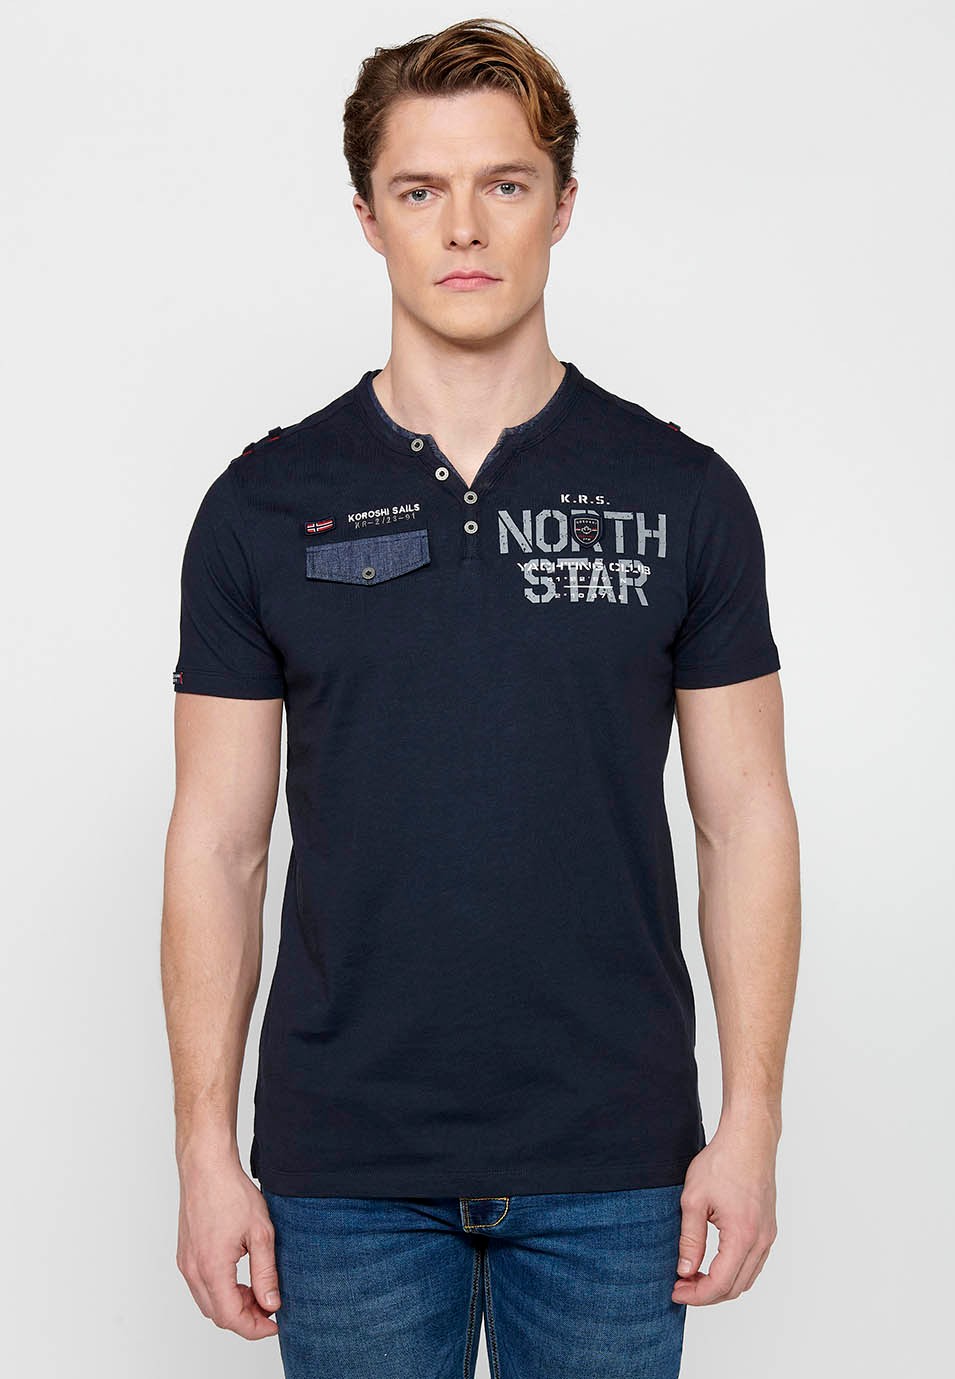 Navy Color Short Sleeve Cotton T-shirt with Round Neck with Buttoned Opening for Men 7